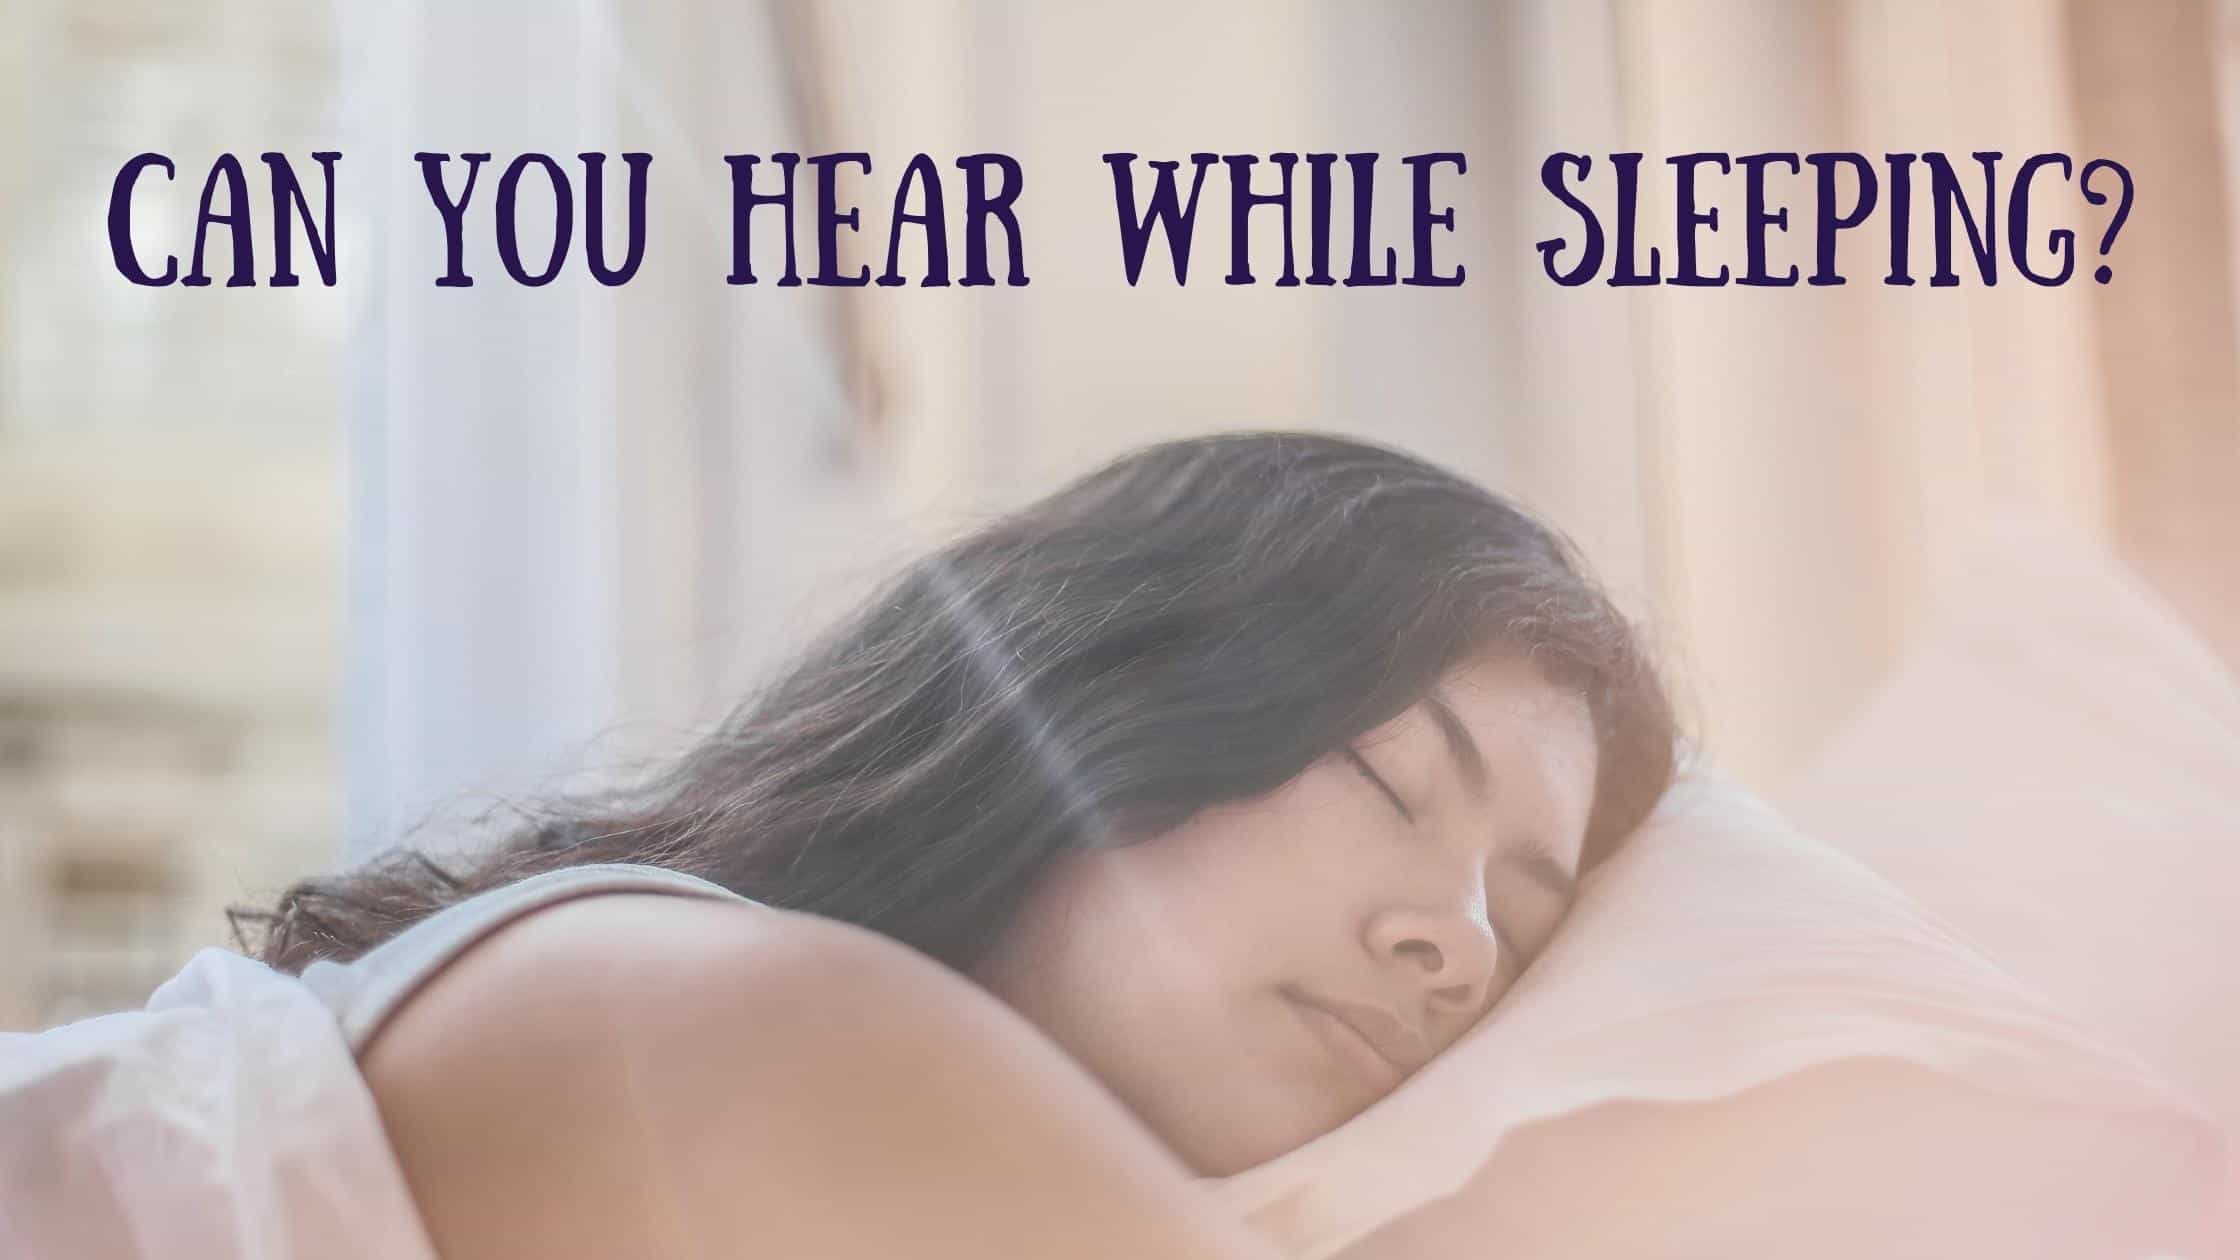 Can you hear while sleeping